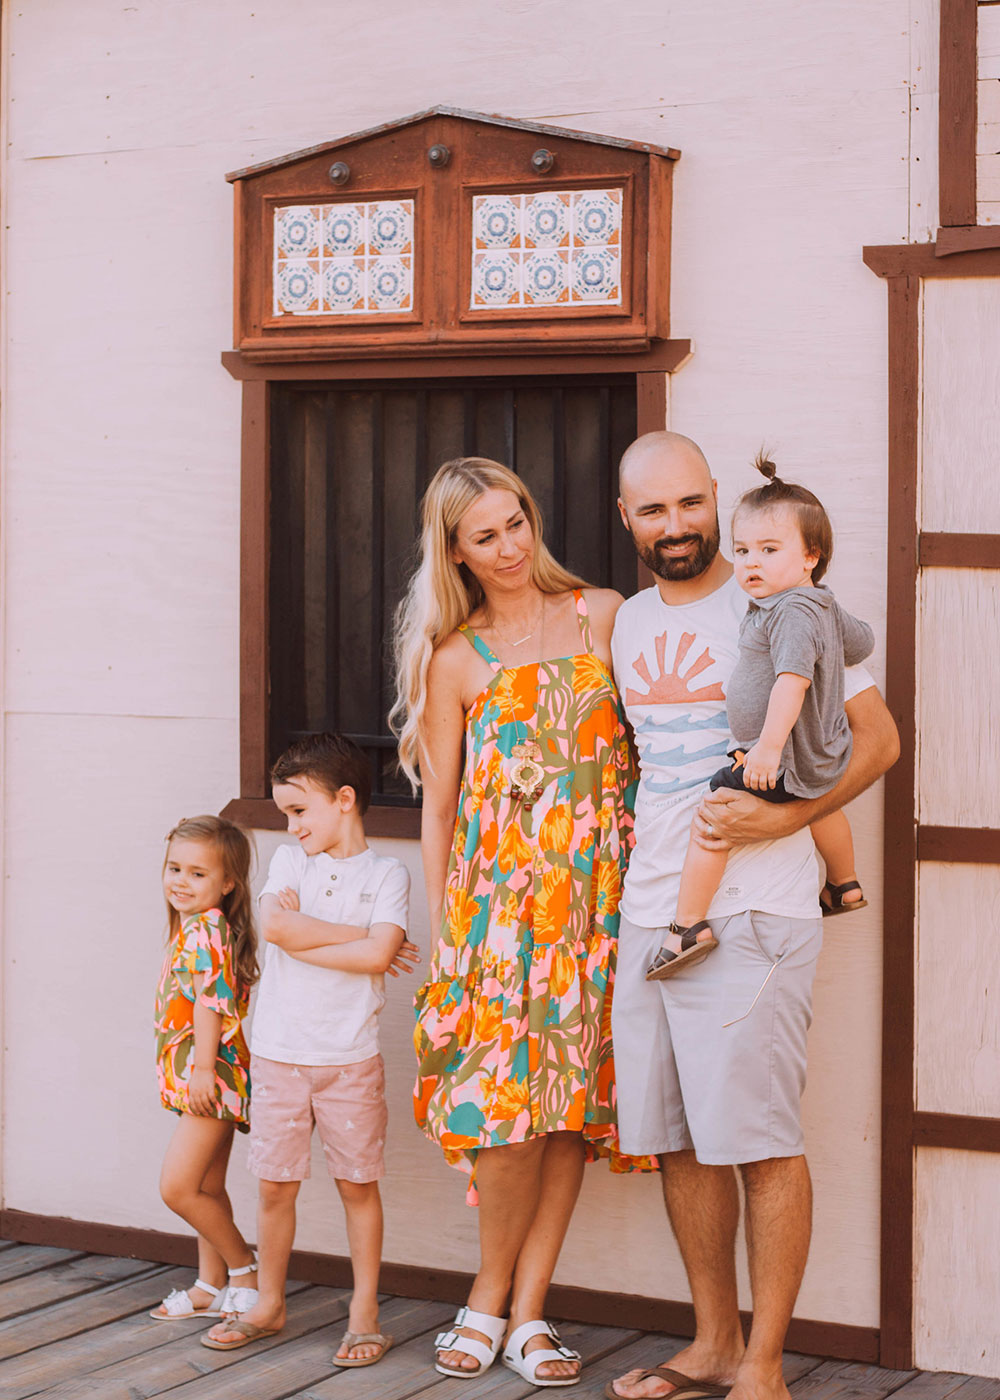 our colorful crazy family photo at the pointe hilton squaw peak resort in phoenix, az | sweetest mommy and me matching outfits by crew and lu | thelovedesignedlife.com